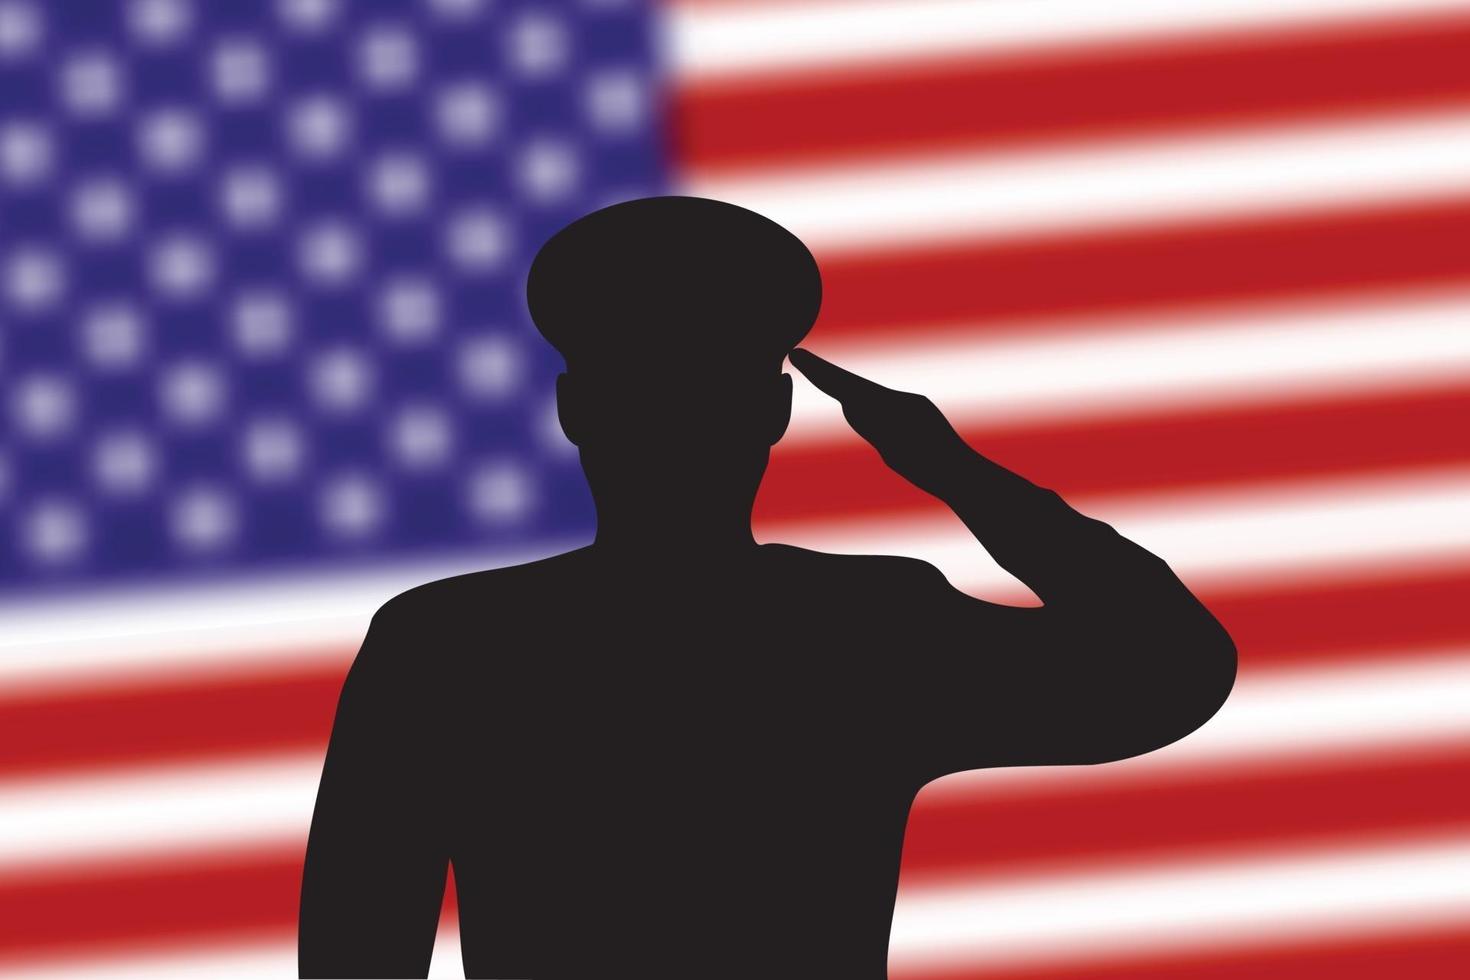 Solder silhouette on blur background with United States flag vector